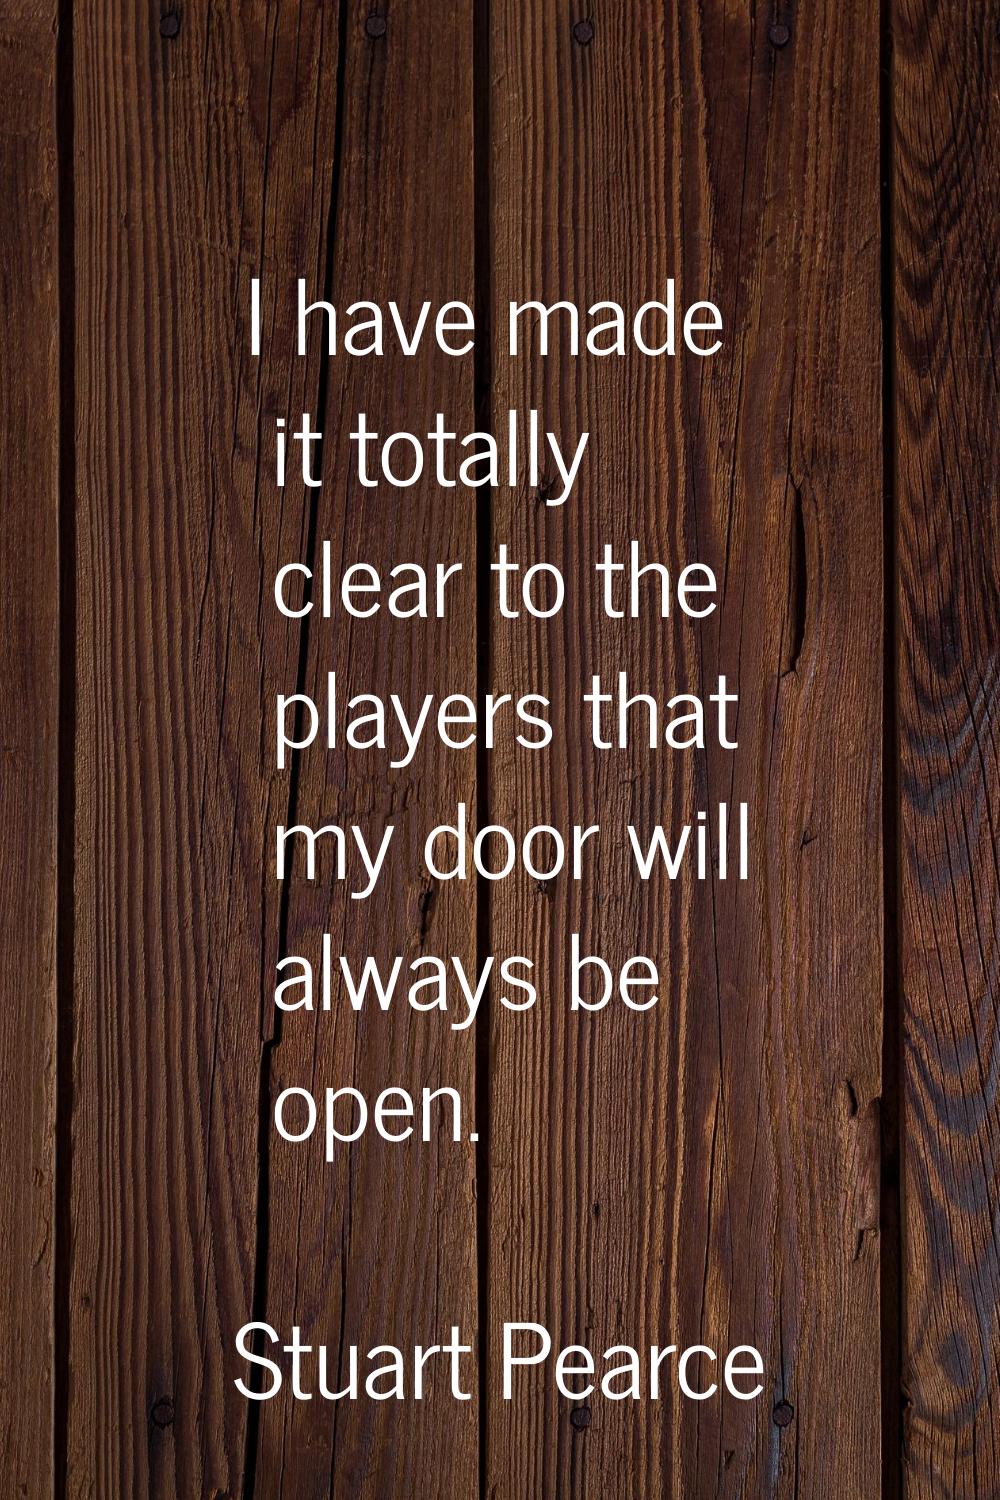 I have made it totally clear to the players that my door will always be open.